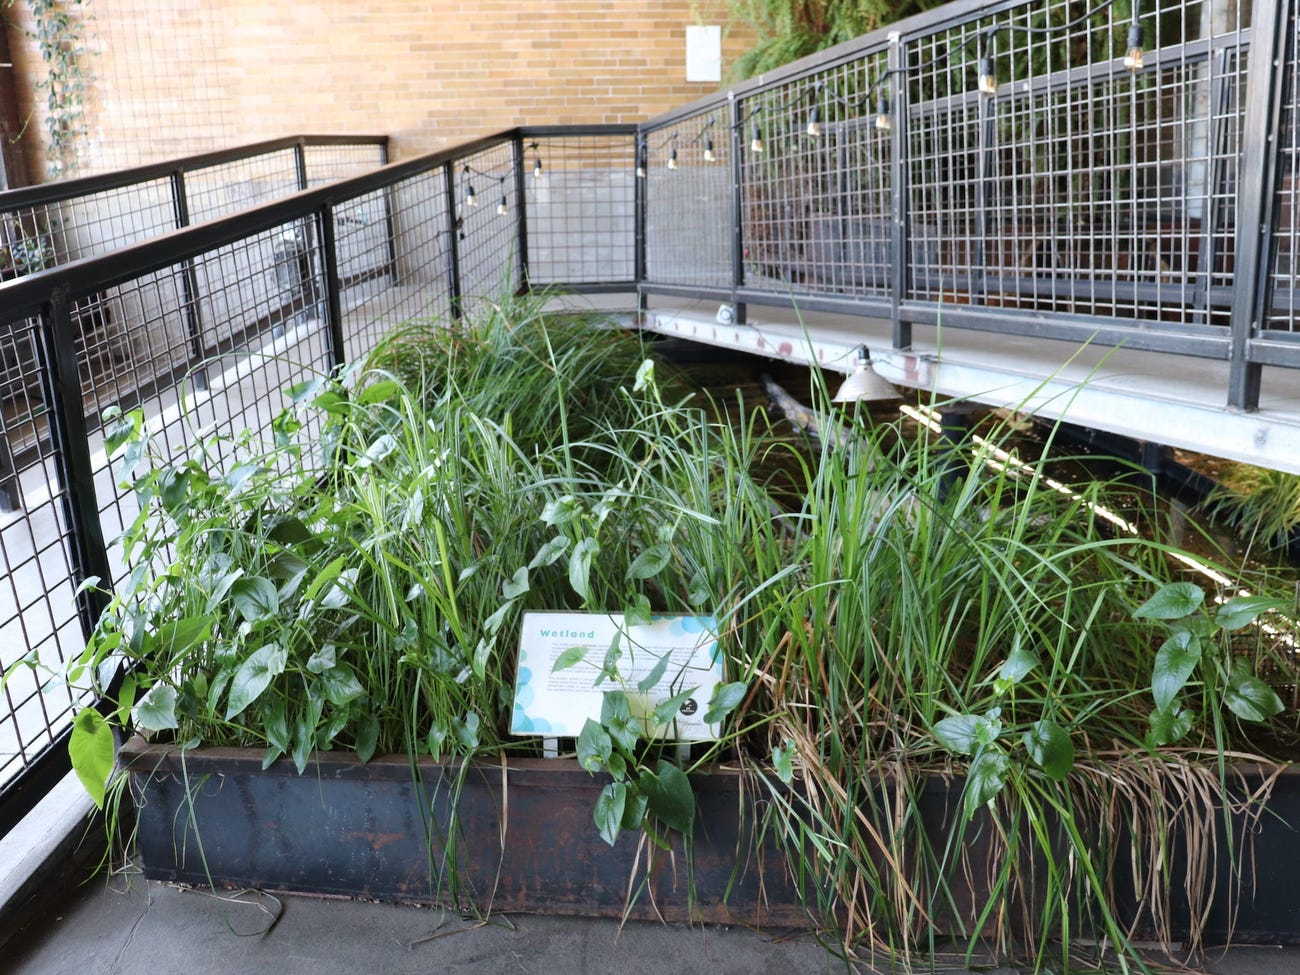 green grasses and leaves sprout from a small pond beneath a concrete and metal ramp indoors around a sign reading "wetland"